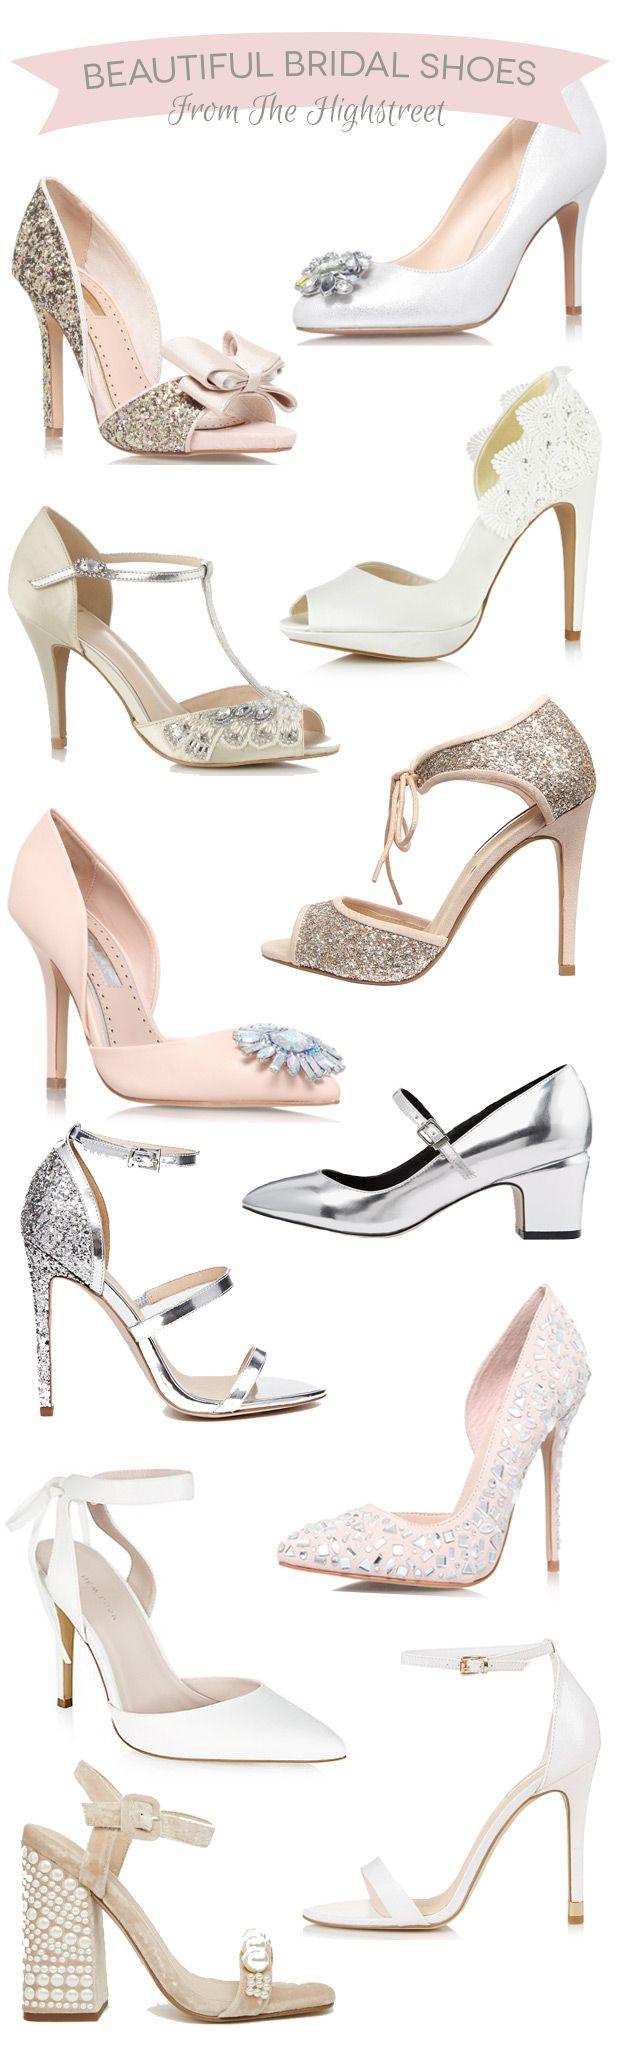 Wedding - Wedding Shoes On A Budget (but Look A Million Dollars!)